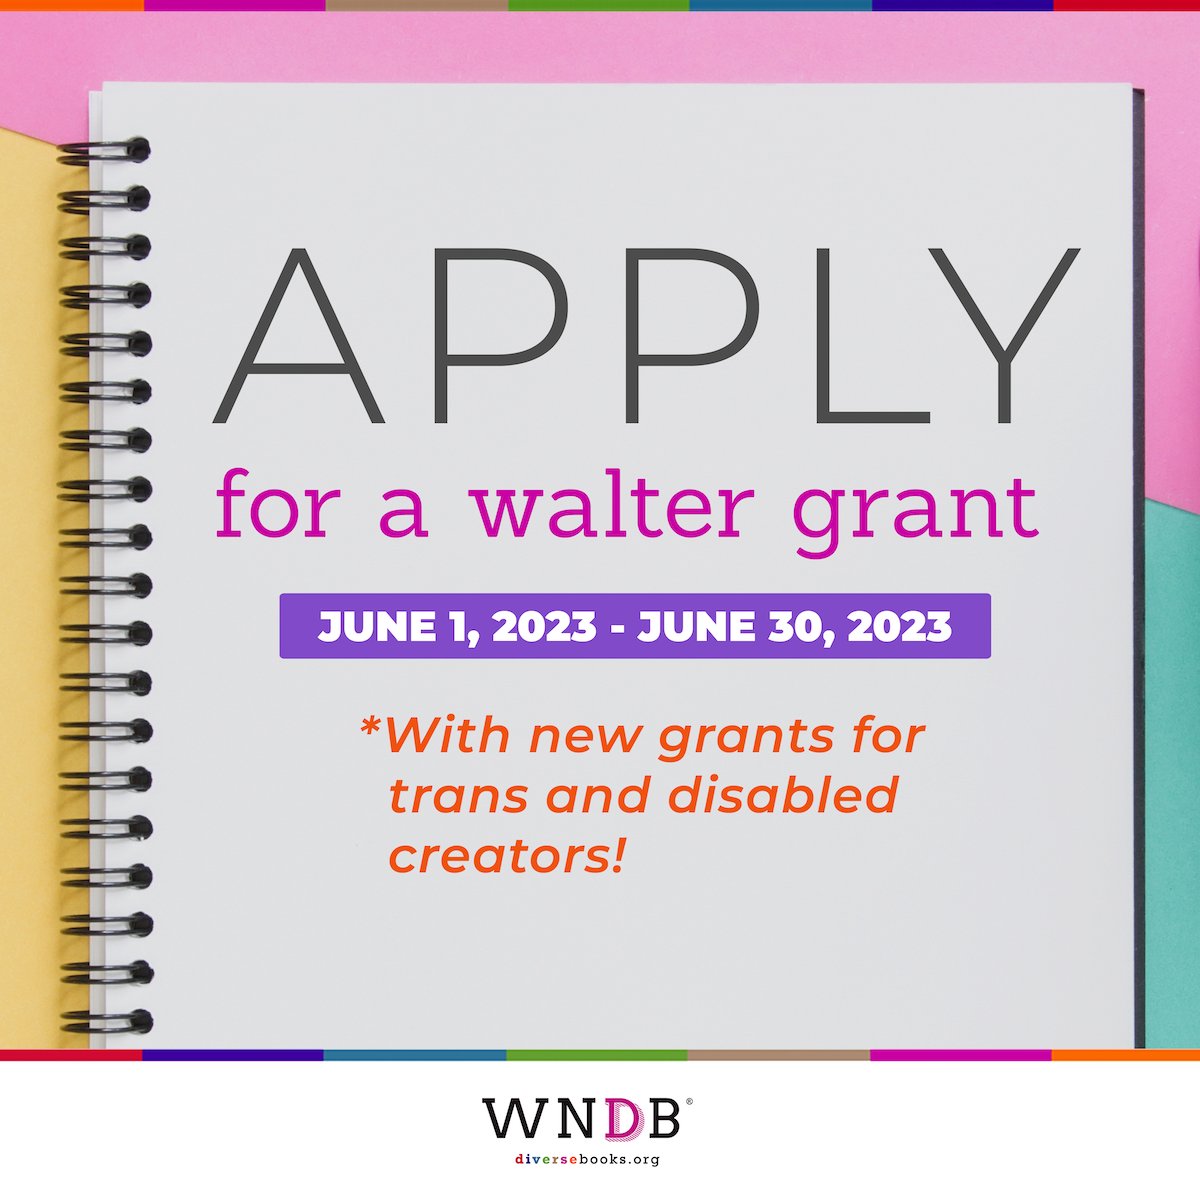 Applications for 2023 Walter Grants are OPEN! These grants are for diverse, unpublished creators and award $2000 to each recipient. This year we have:

✨ 5 general grants
✨ 2 trans creator grants
✨ 1 disabled writer grant

Info + application here: ow.ly/eI4550OCcO7